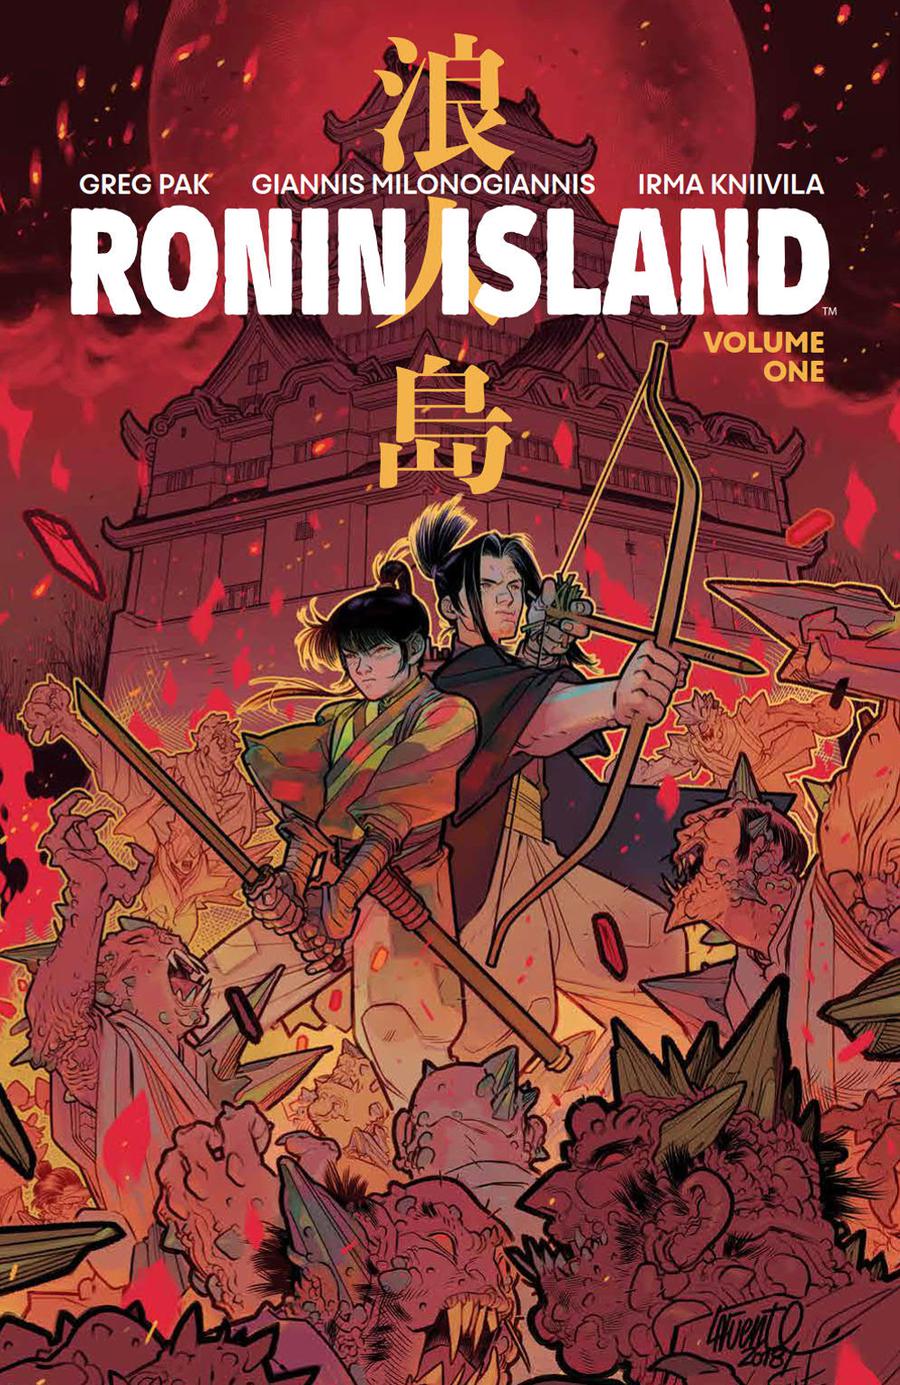 Ronin Island Vol 1 TP Previews Exclusive Discover Now Edition